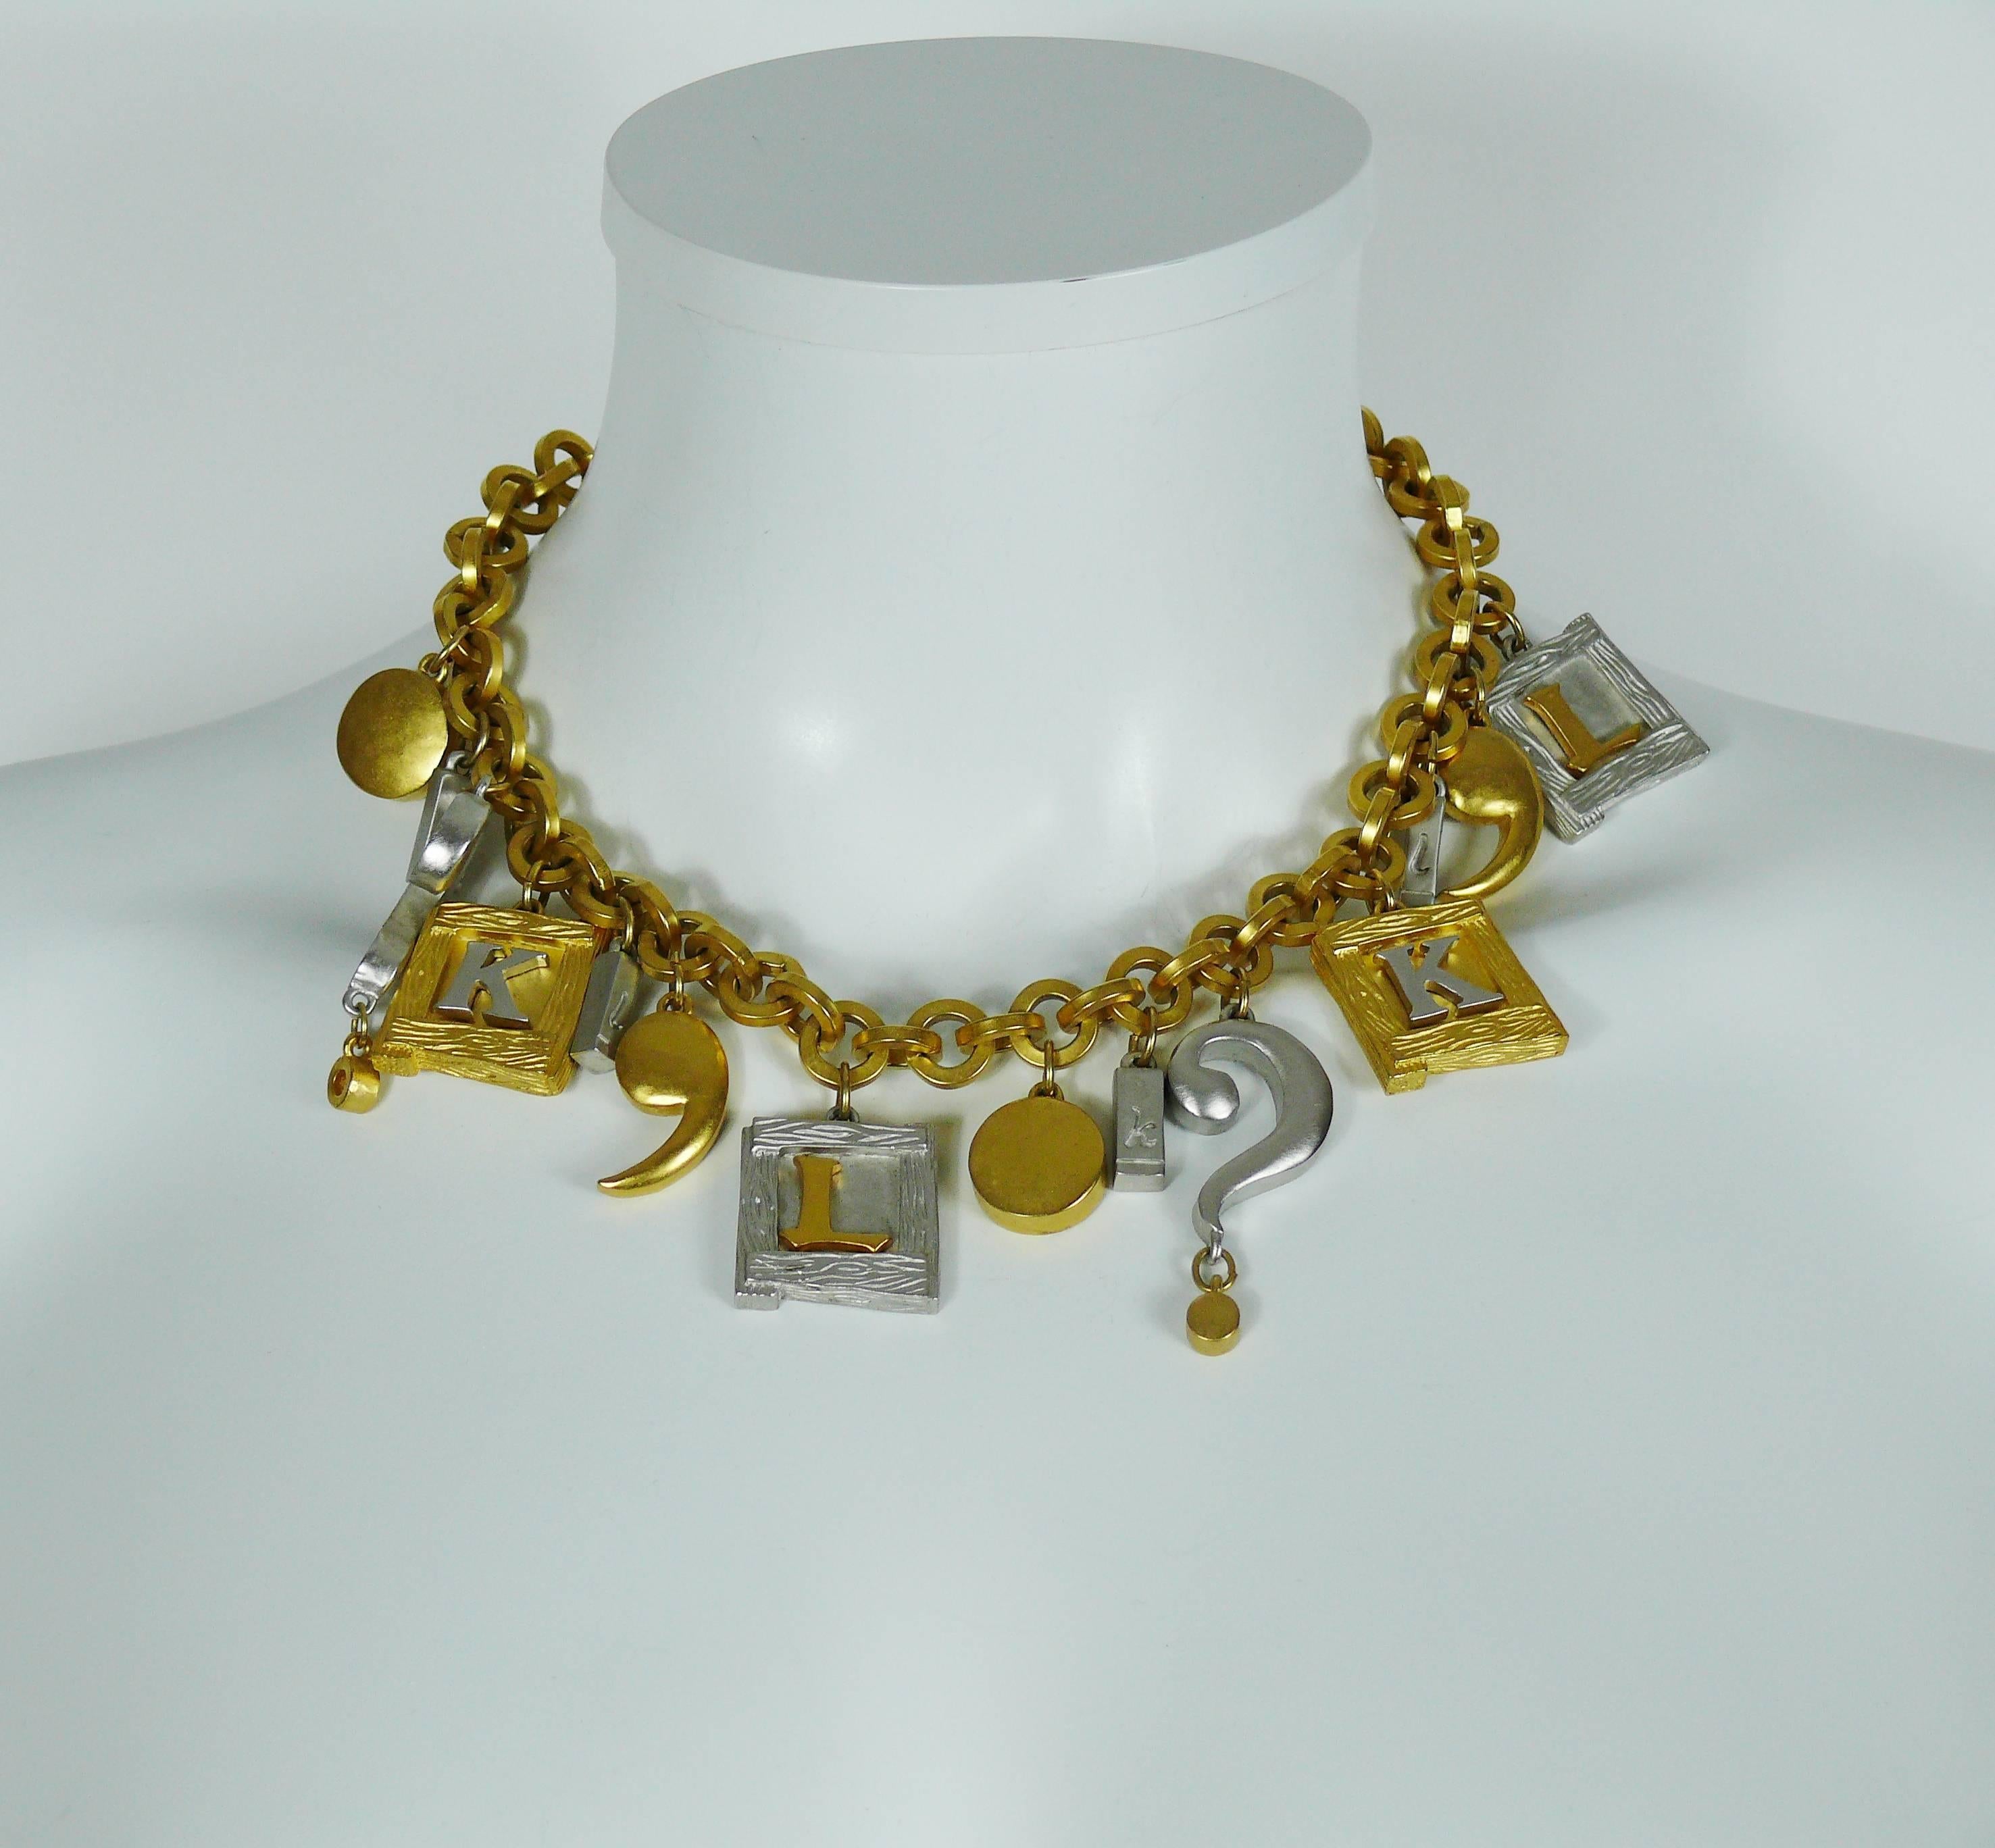 KARL LAGERFELD beautiful vintage gold tone chunky chain necklace featuring various charms : initials, dots, question marks...

Marked KL.

Indicative measurements : total length approx. 48 cm (18.90 inches) / adjustable length from approx. 43 cm